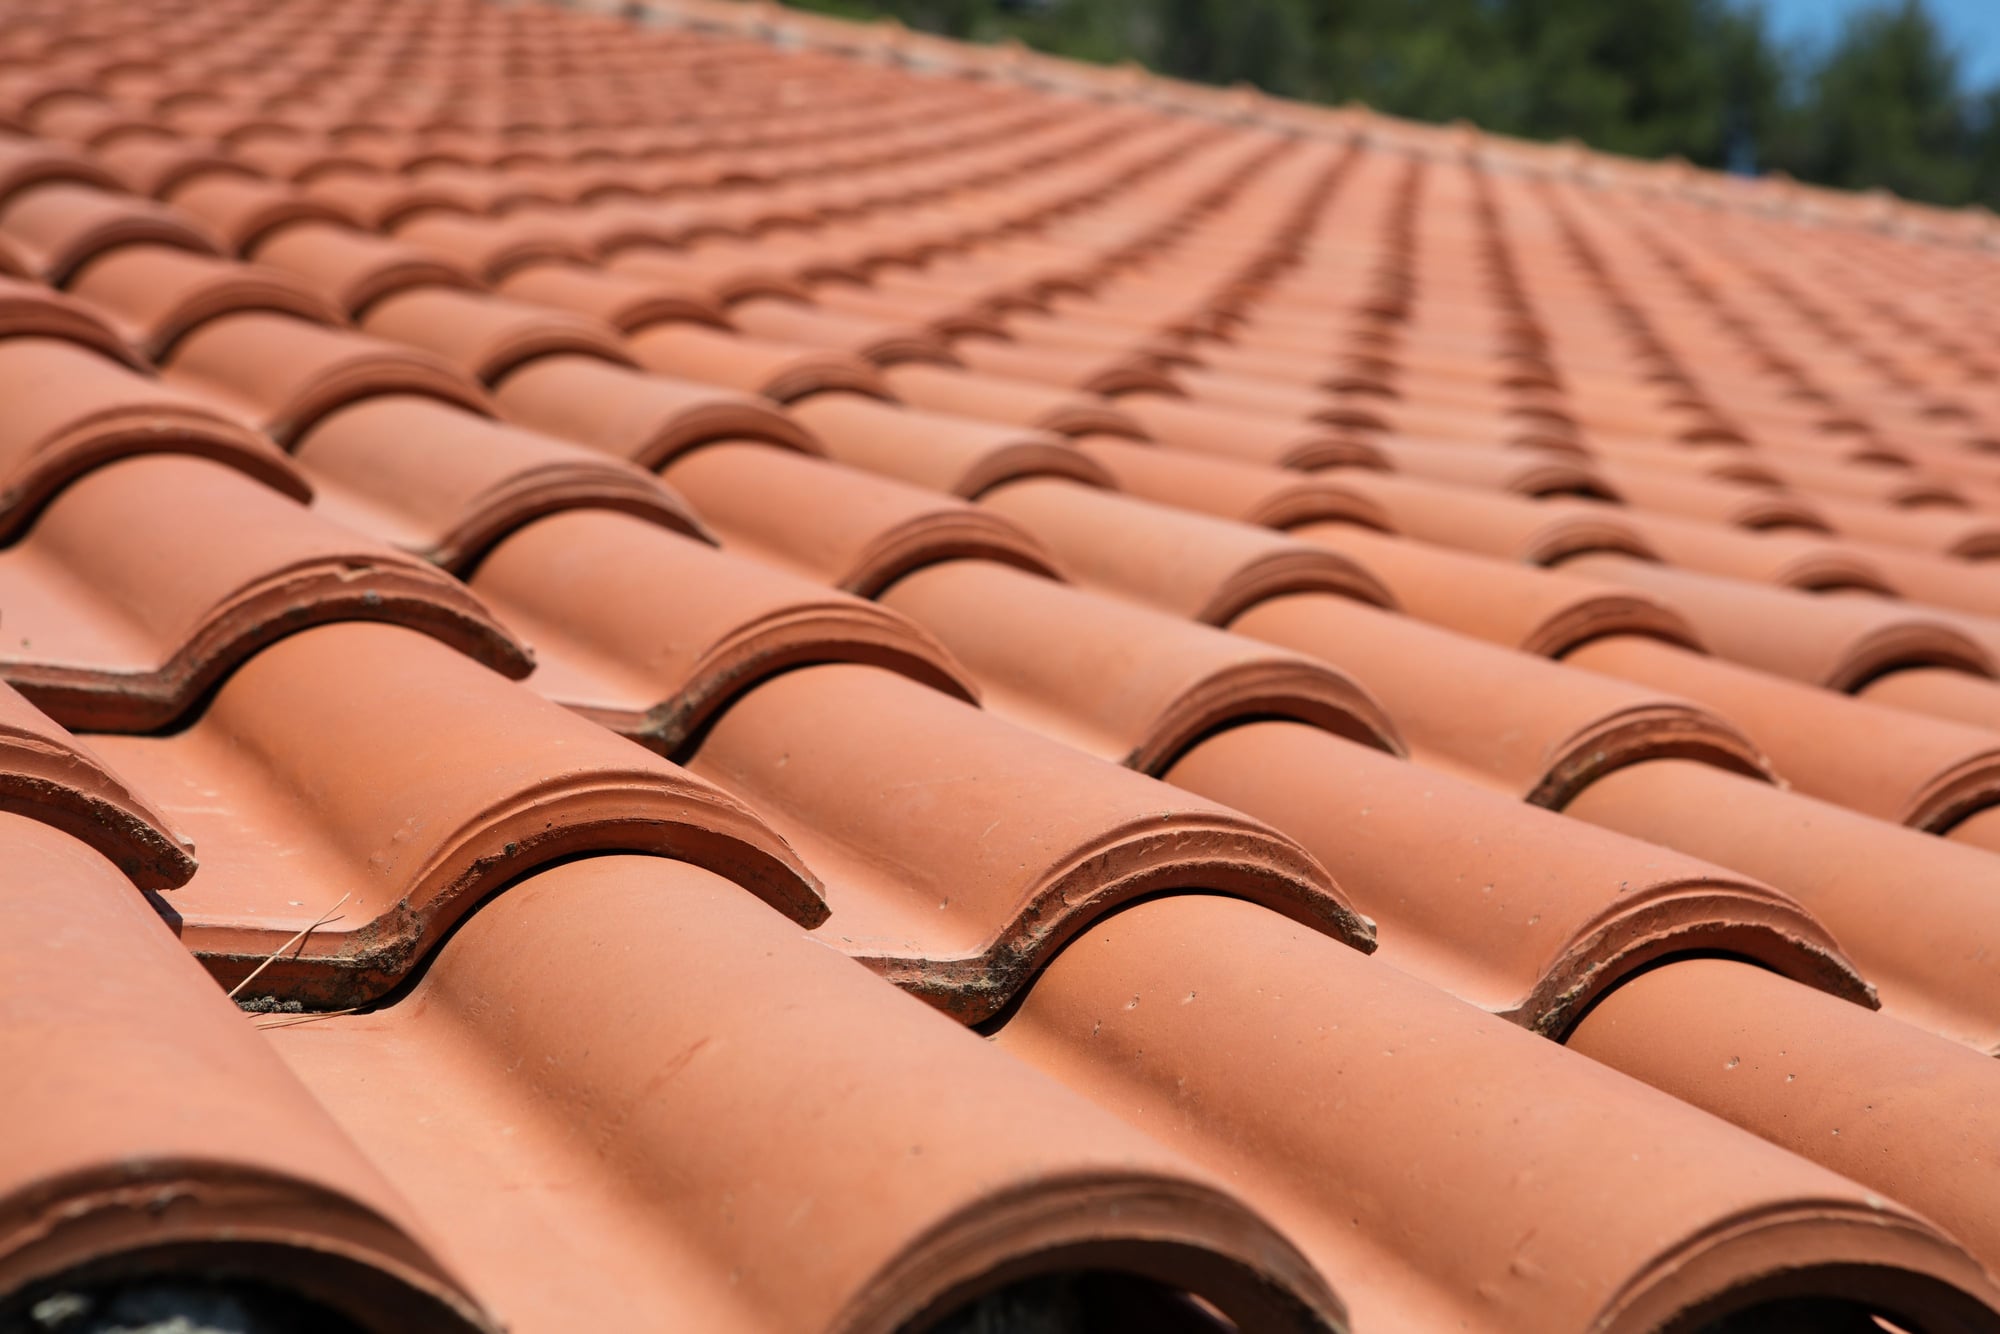 How to Fix a Leak on a Clay Tile Roof | DoItYourself.com